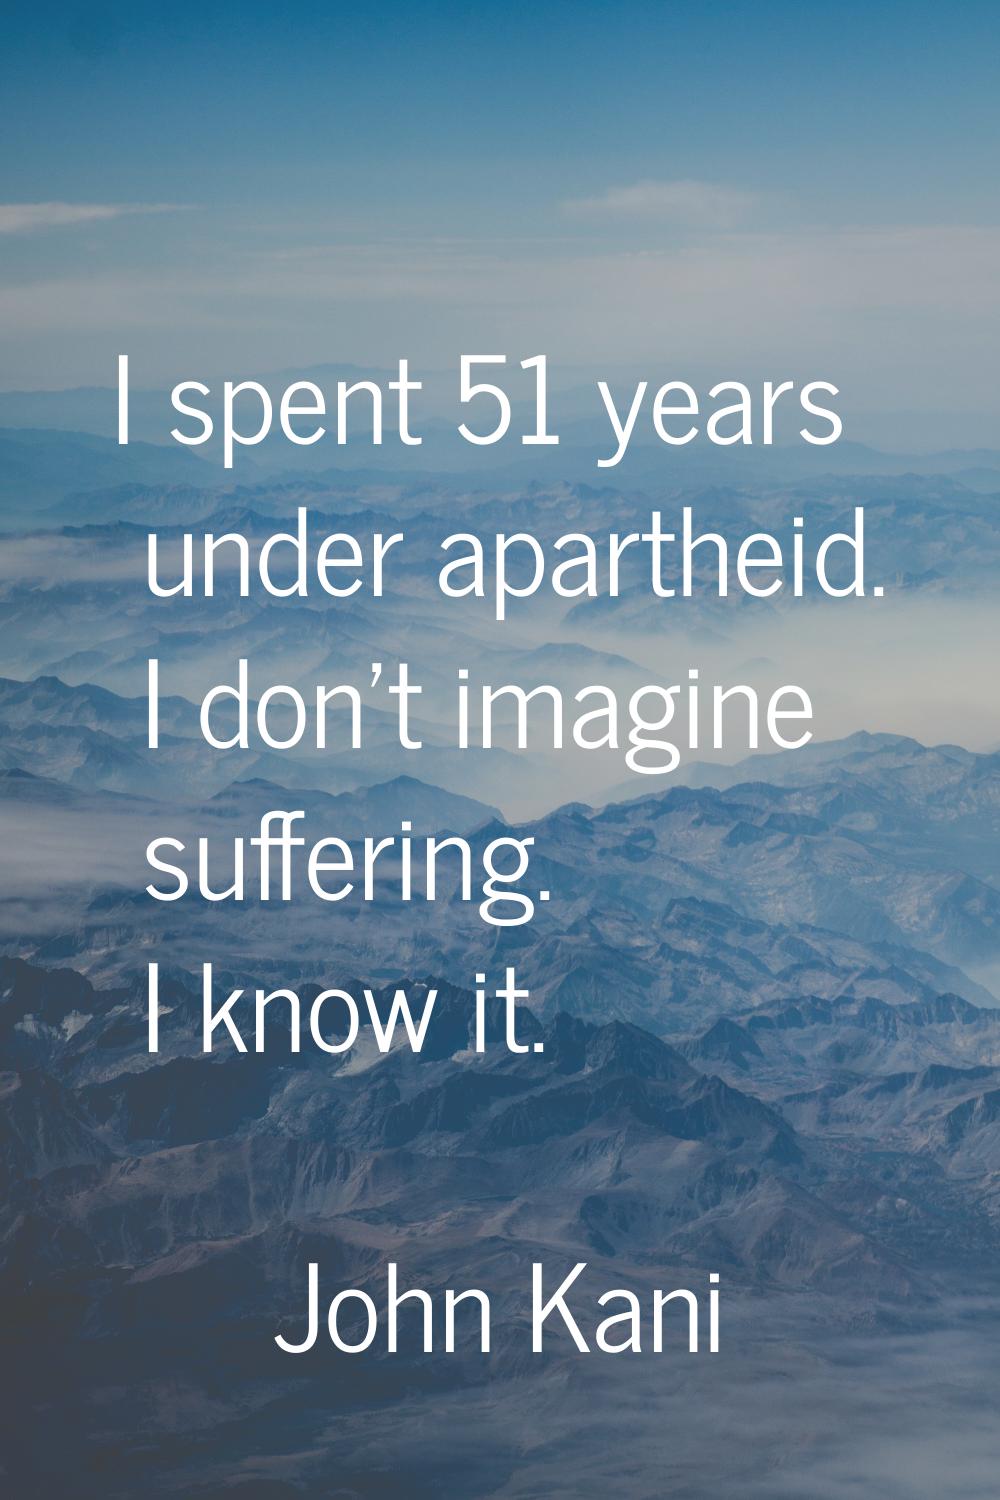 I spent 51 years under apartheid. I don't imagine suffering. I know it.